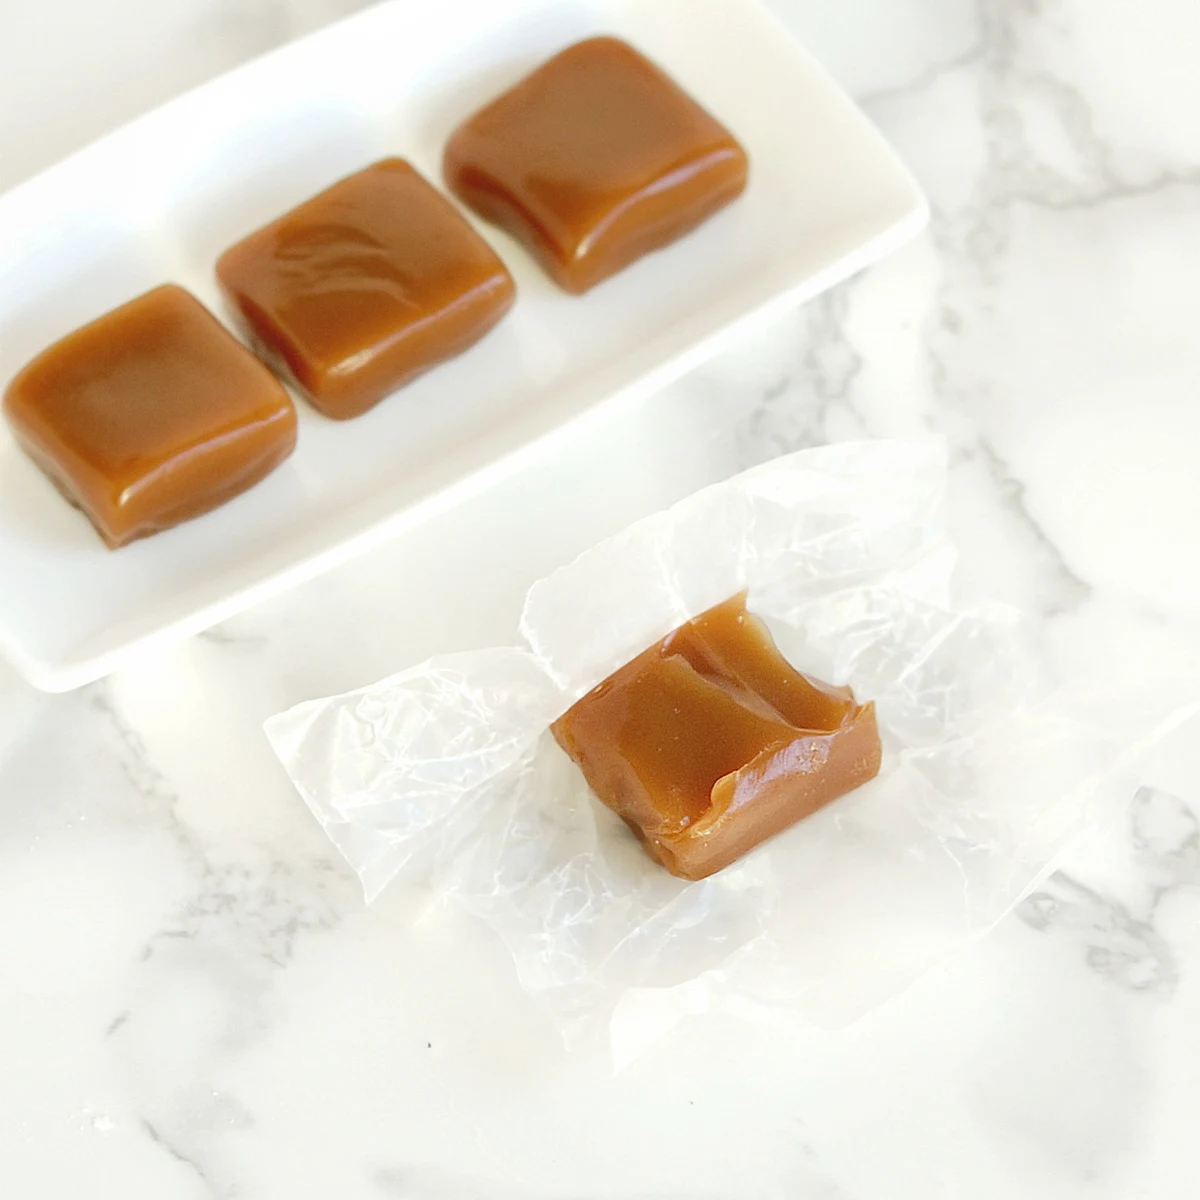 Apple Cider Caramels – With video